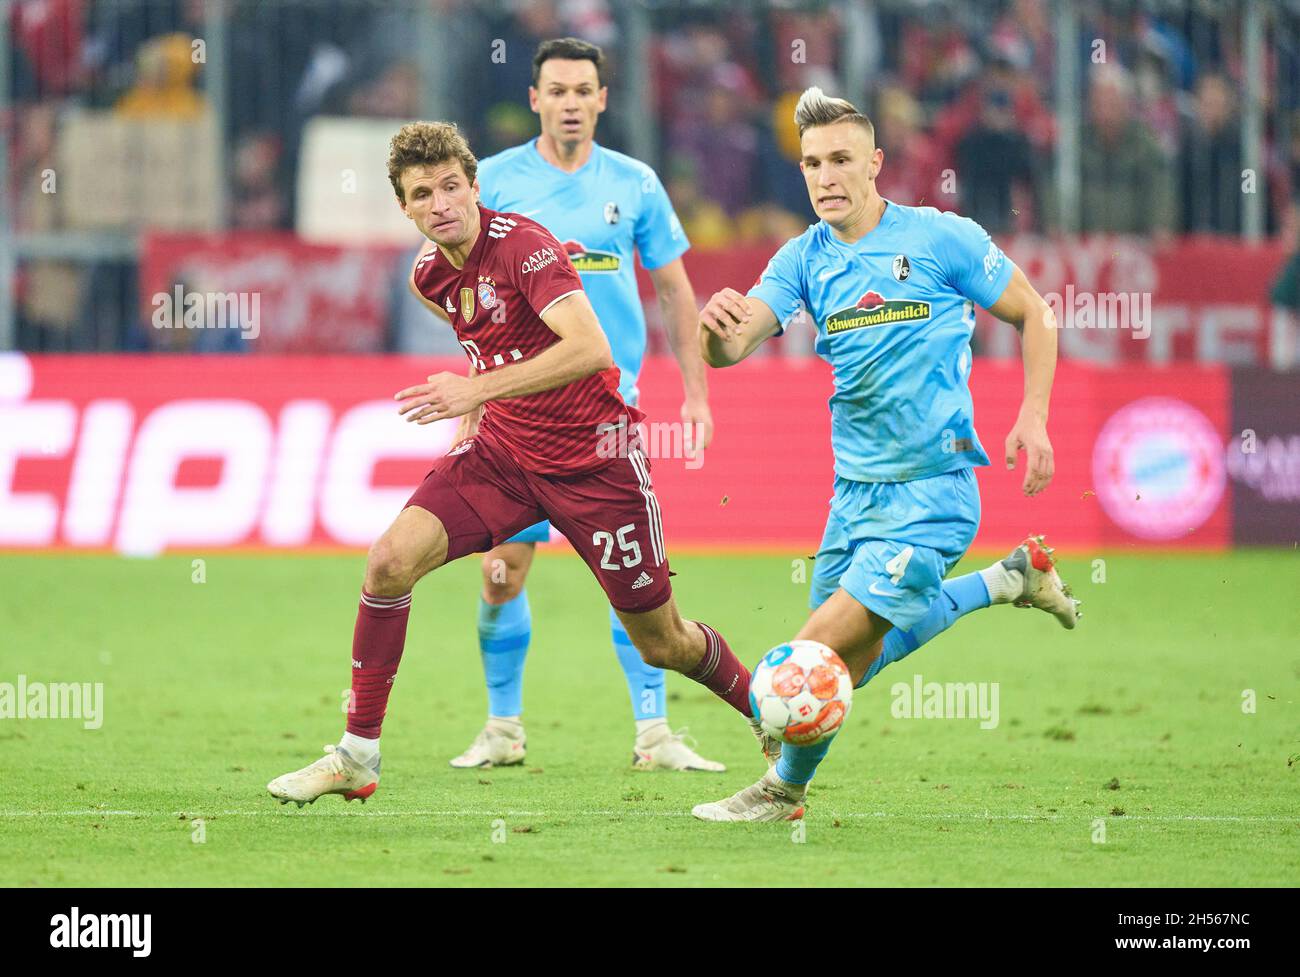 Thomas MUELLER, MÜLLER, FCB 25  compete for the ball, tackling, duel, header, zweikampf, action, fight against Nico Schlotterbeck, FRG 4  in the match FC BAYERN MUENCHEN - SC FREIBURG 2-1 1.German Football League on November 6, 2021 in Munich, Germany. Season 2021/2022, matchday 11, 1.Bundesliga, FCB, München, 11.Spieltag. © Peter Schatz / Alamy Live News    - DFL REGULATIONS PROHIBIT ANY USE OF PHOTOGRAPHS as IMAGE SEQUENCES and/or QUASI-VIDEO - Stock Photo